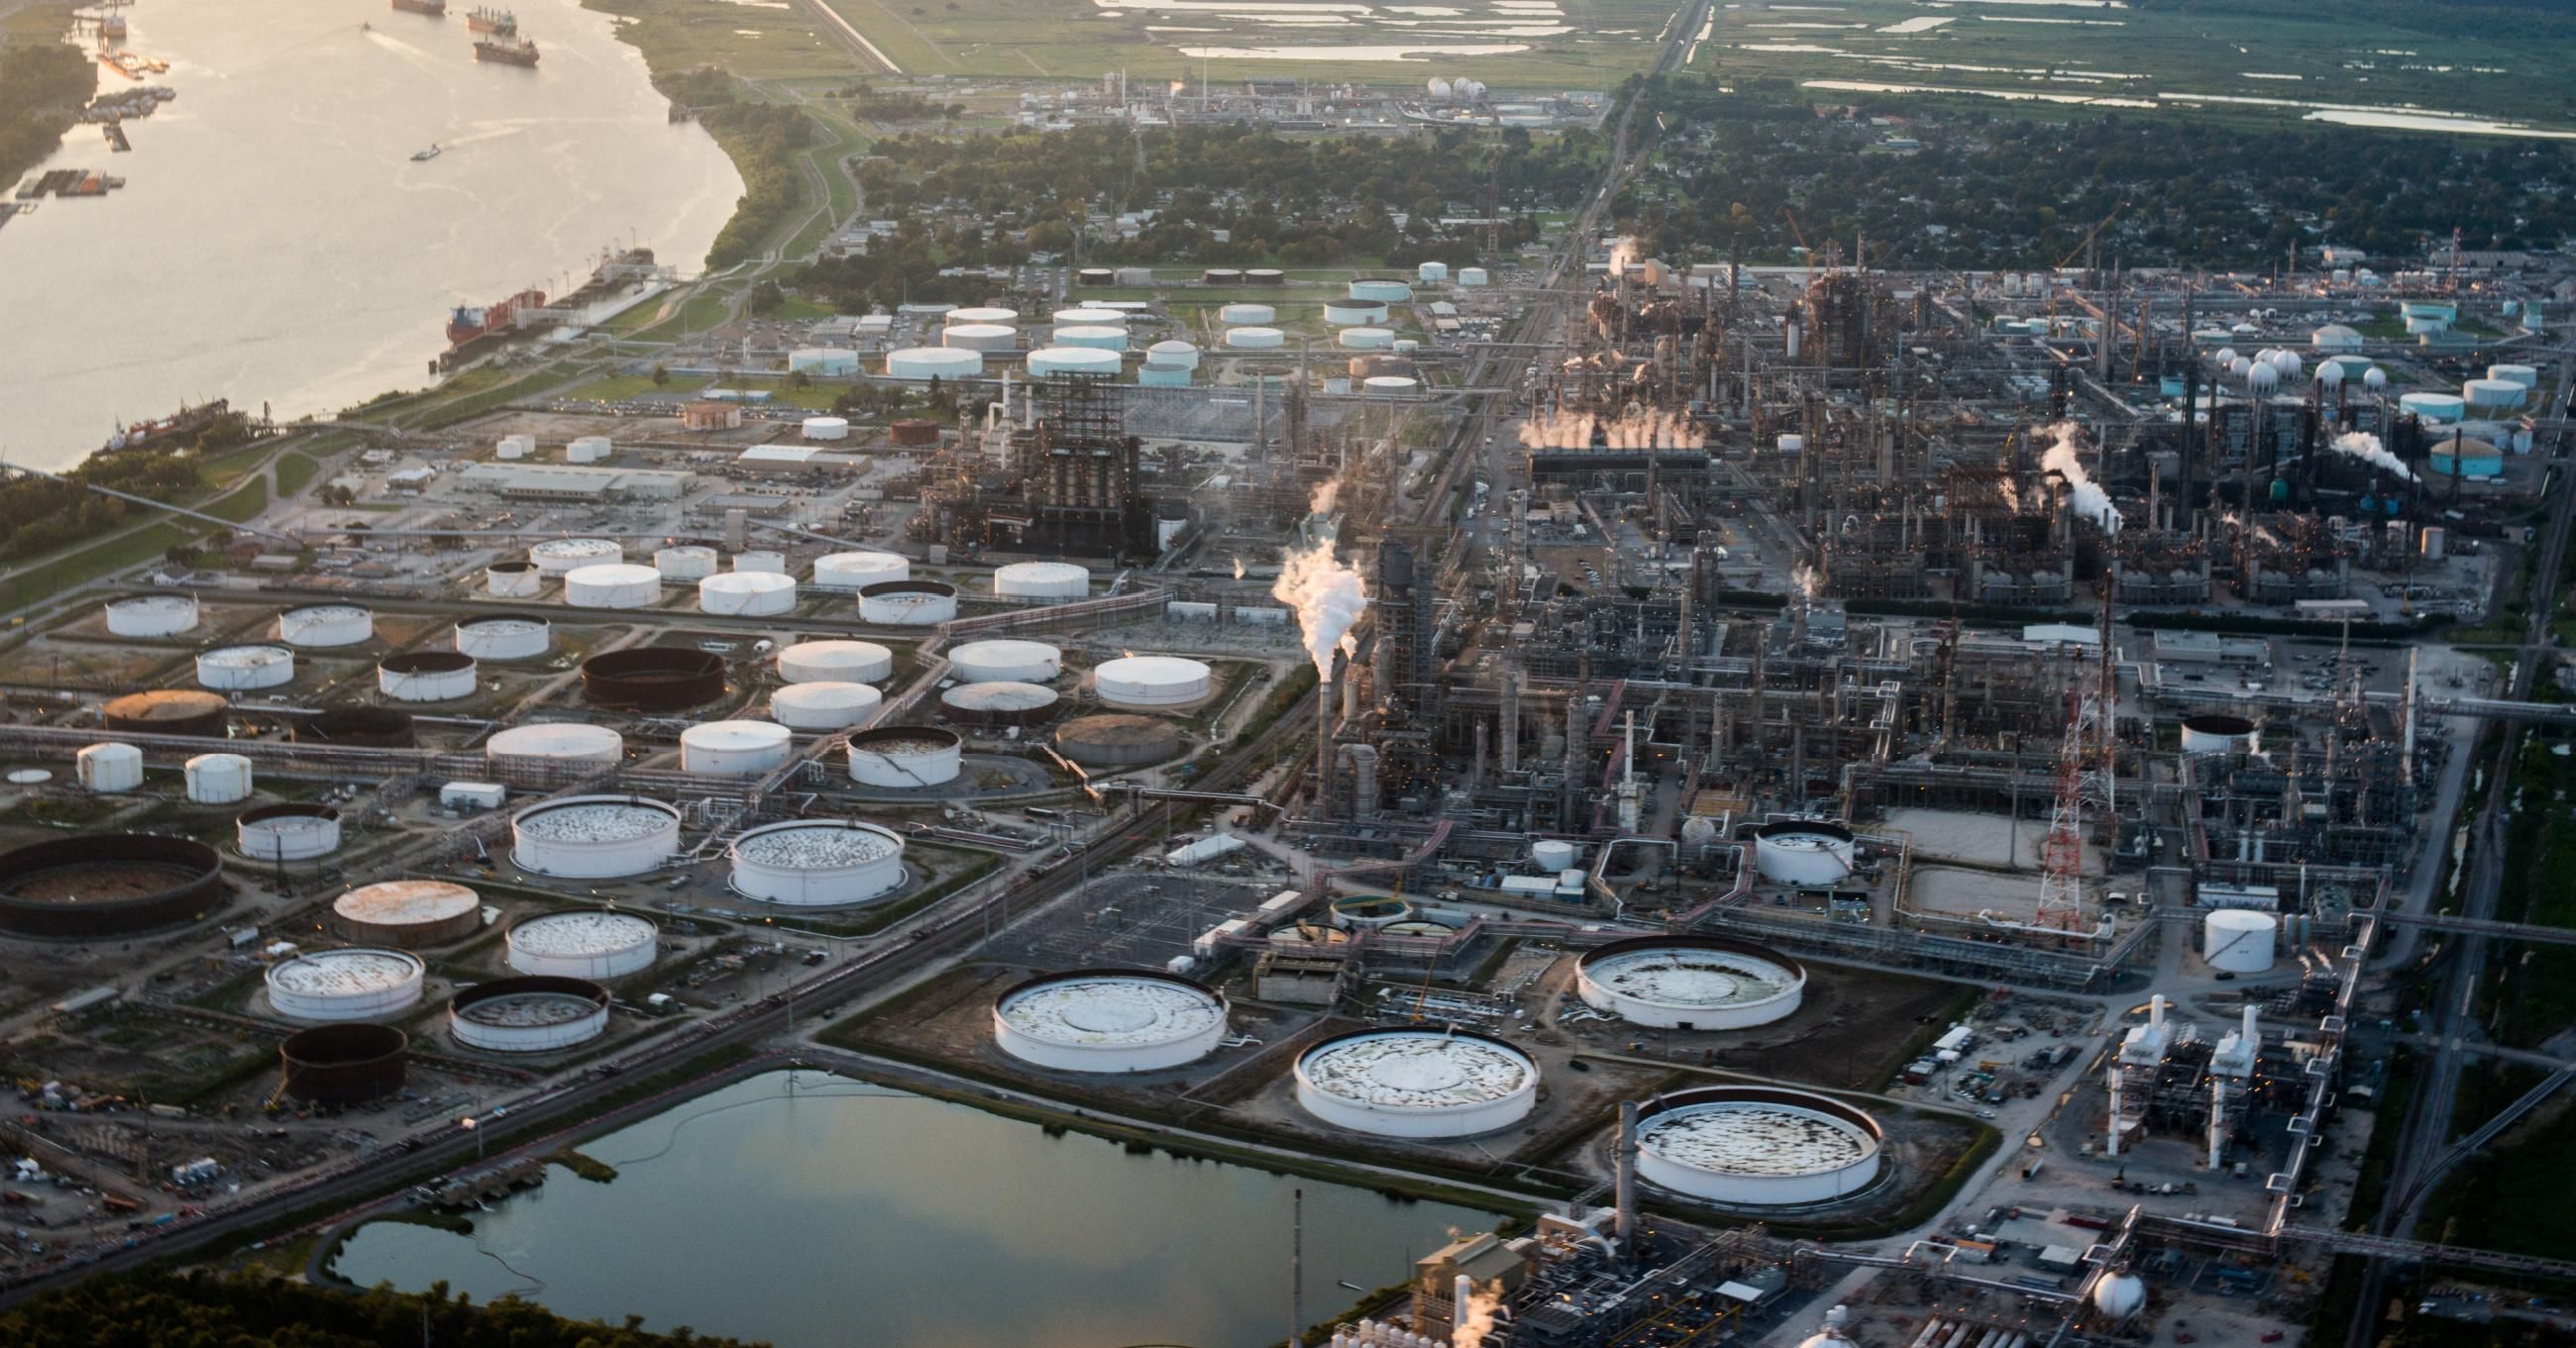 Chemical plants, fossil fuel refineries, and factories line the Mississippi River in the area of Louisiana known as "Cancer Alley." (Photo: Giles Clarke/Getty Images) 